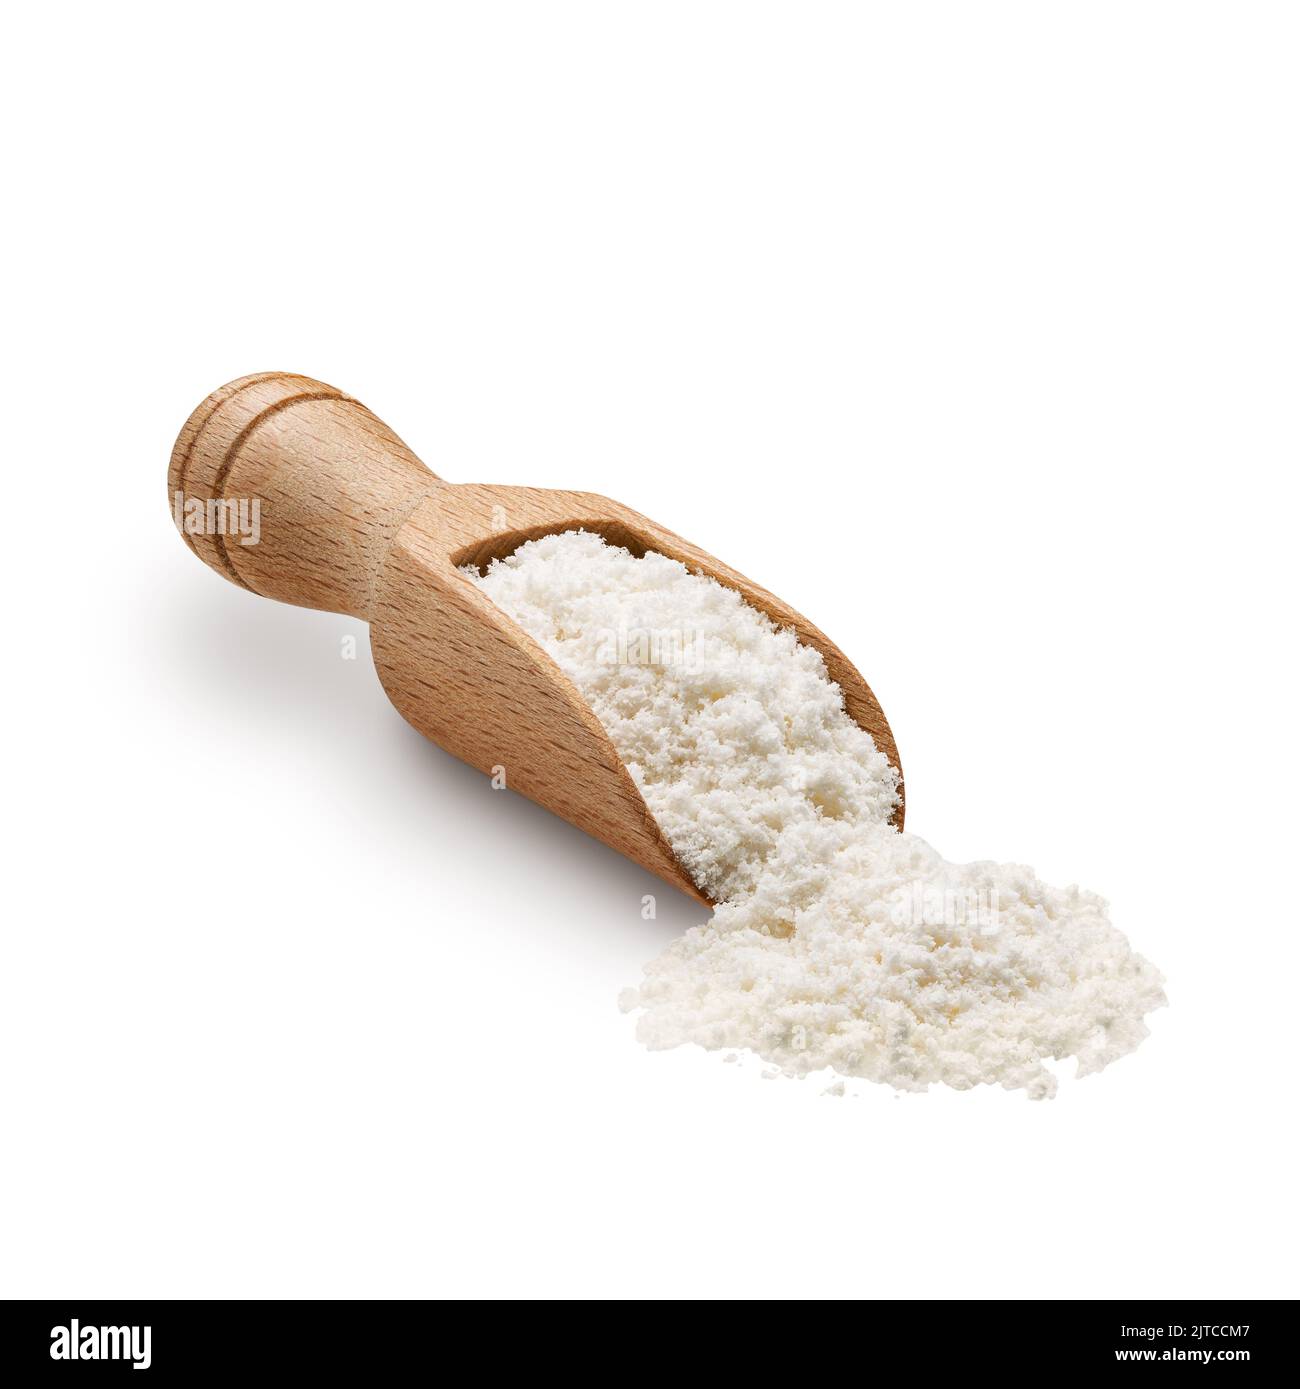 Wooden scoop full of coconut flour isolated on white background Stock Photo